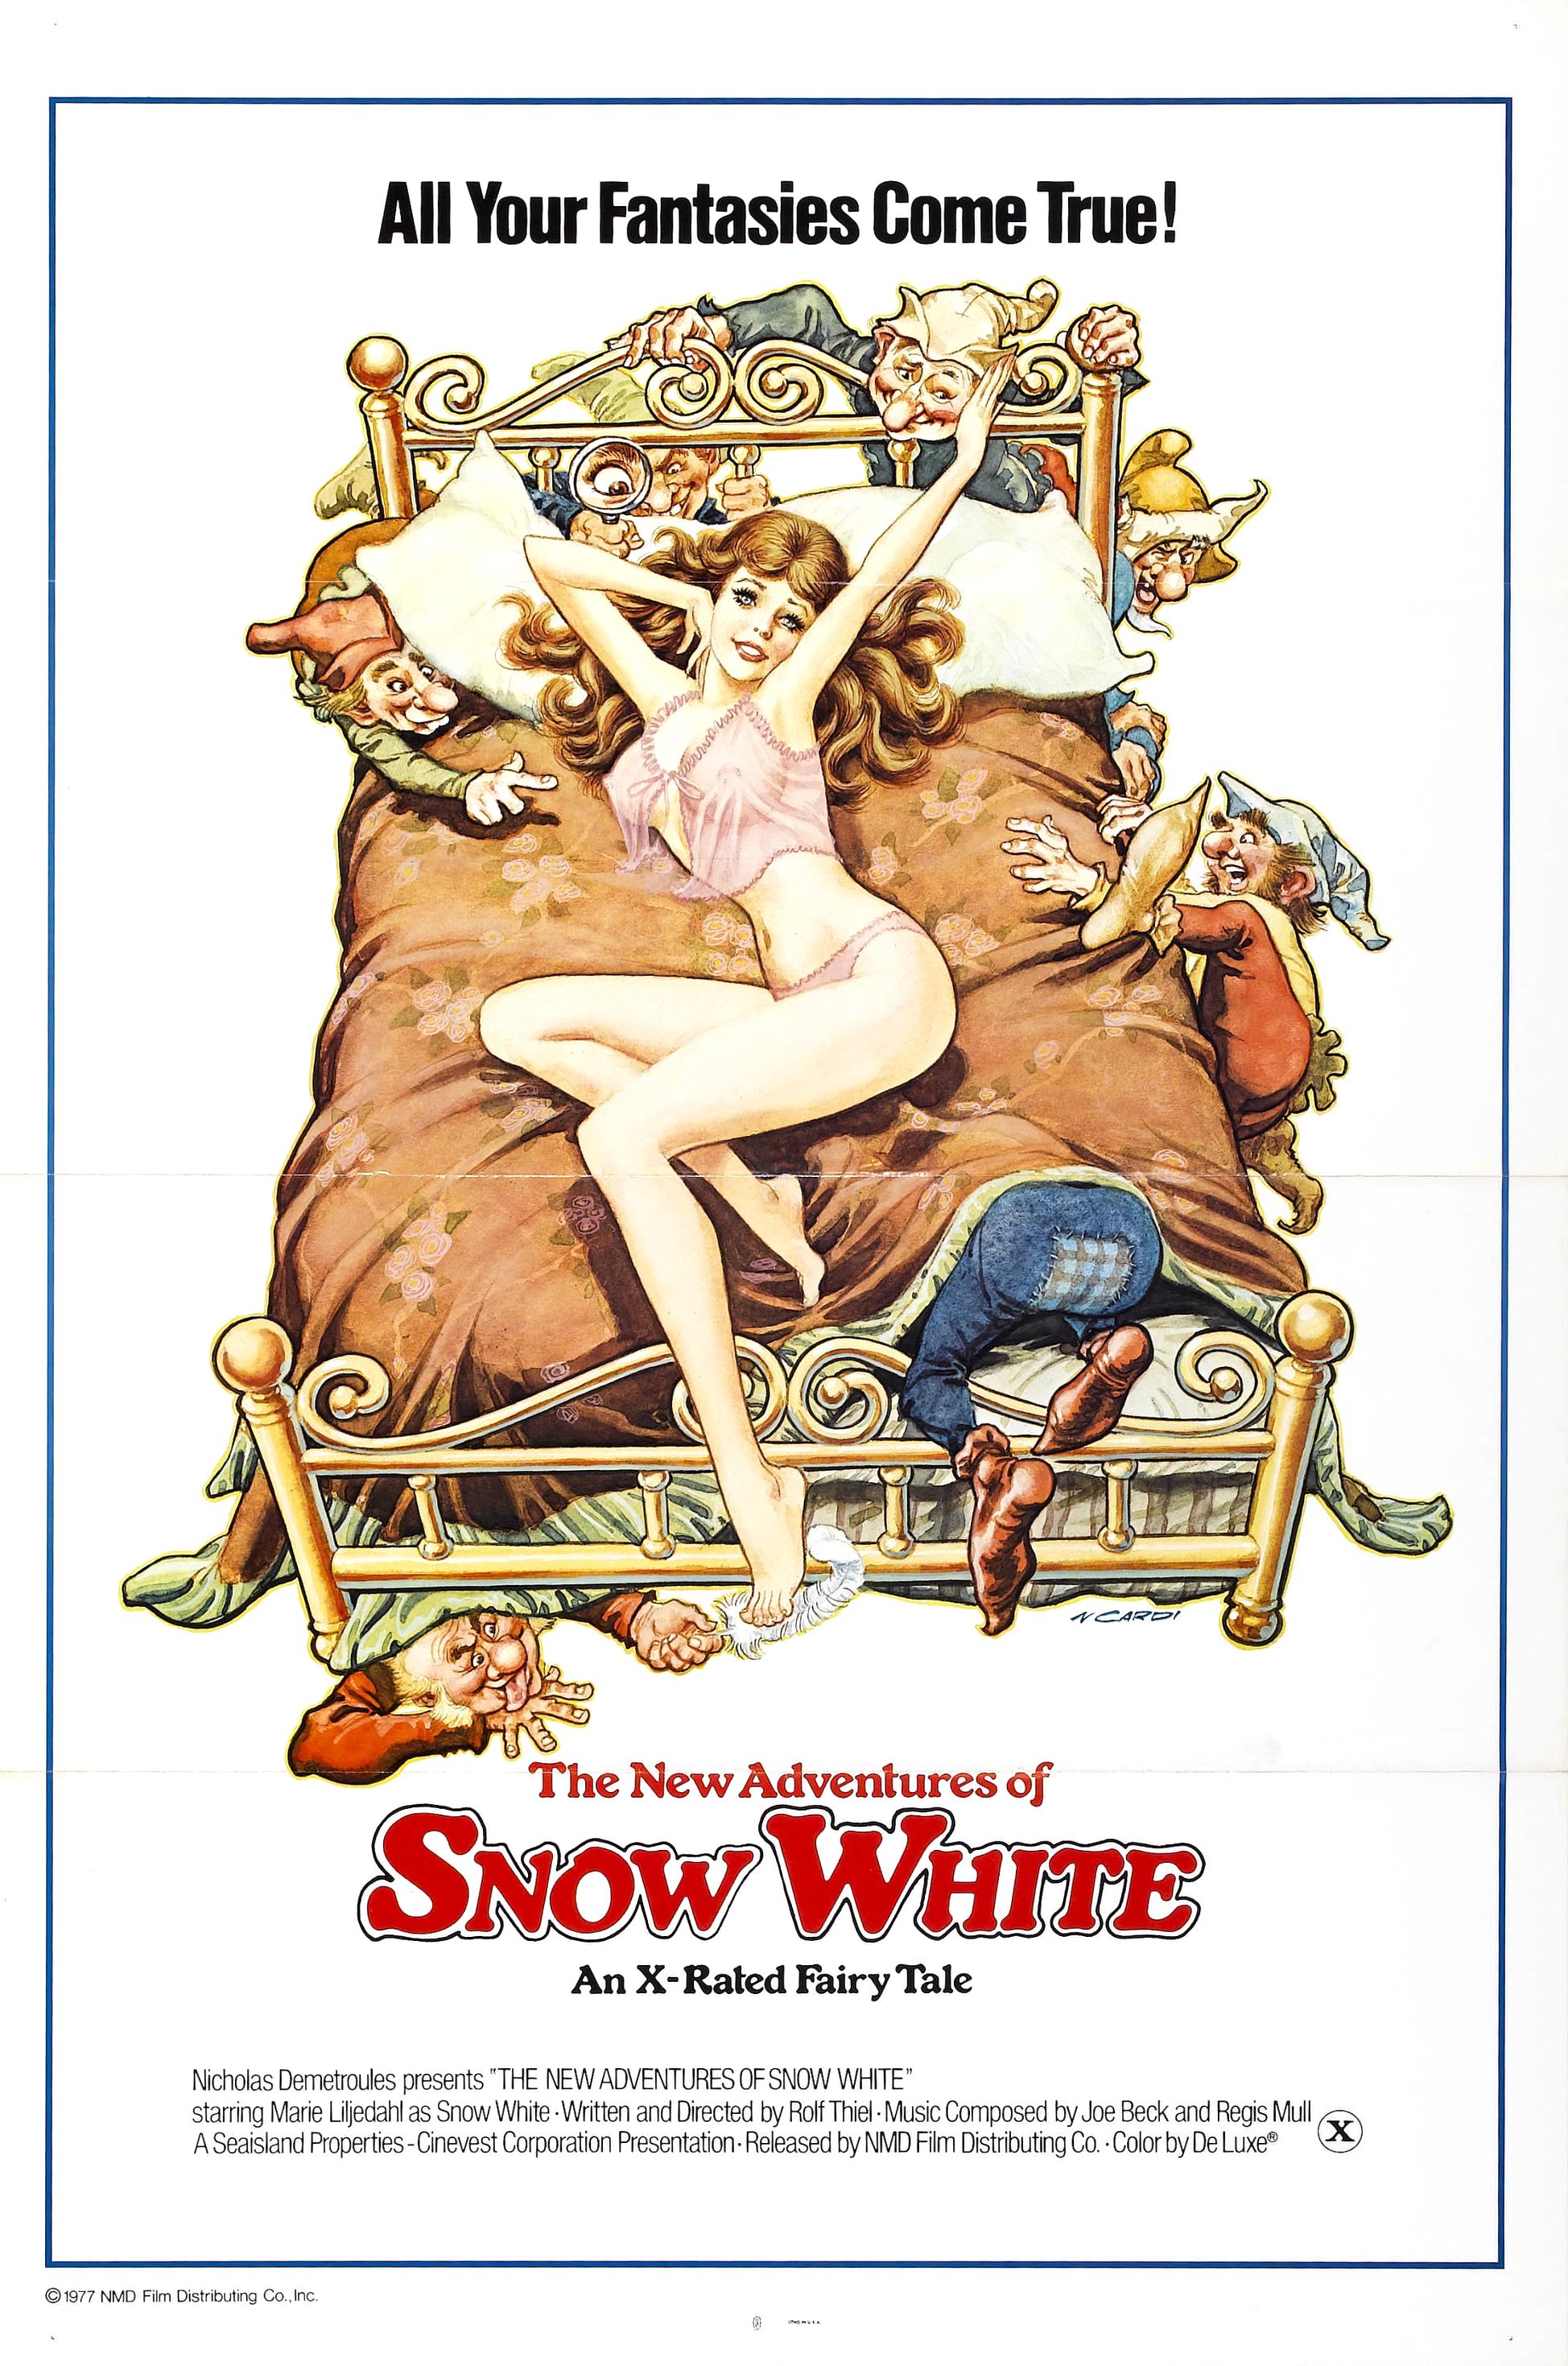 The New Adventures of Snow White (1969) Screenshot 4